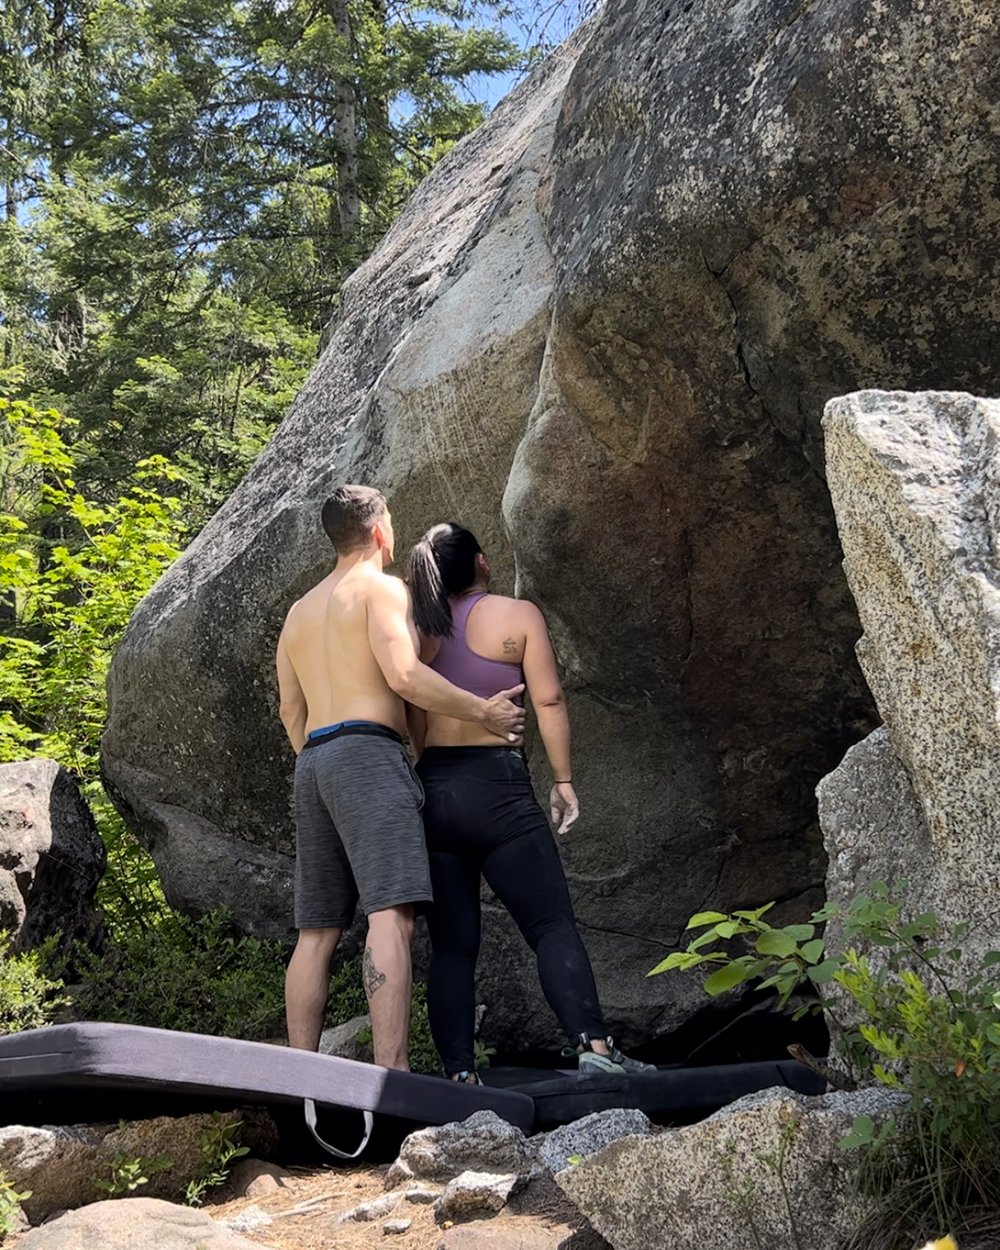  Looking for beta together between my attempts on Sleeve Ace V3 in Swiftwater Boulders.  